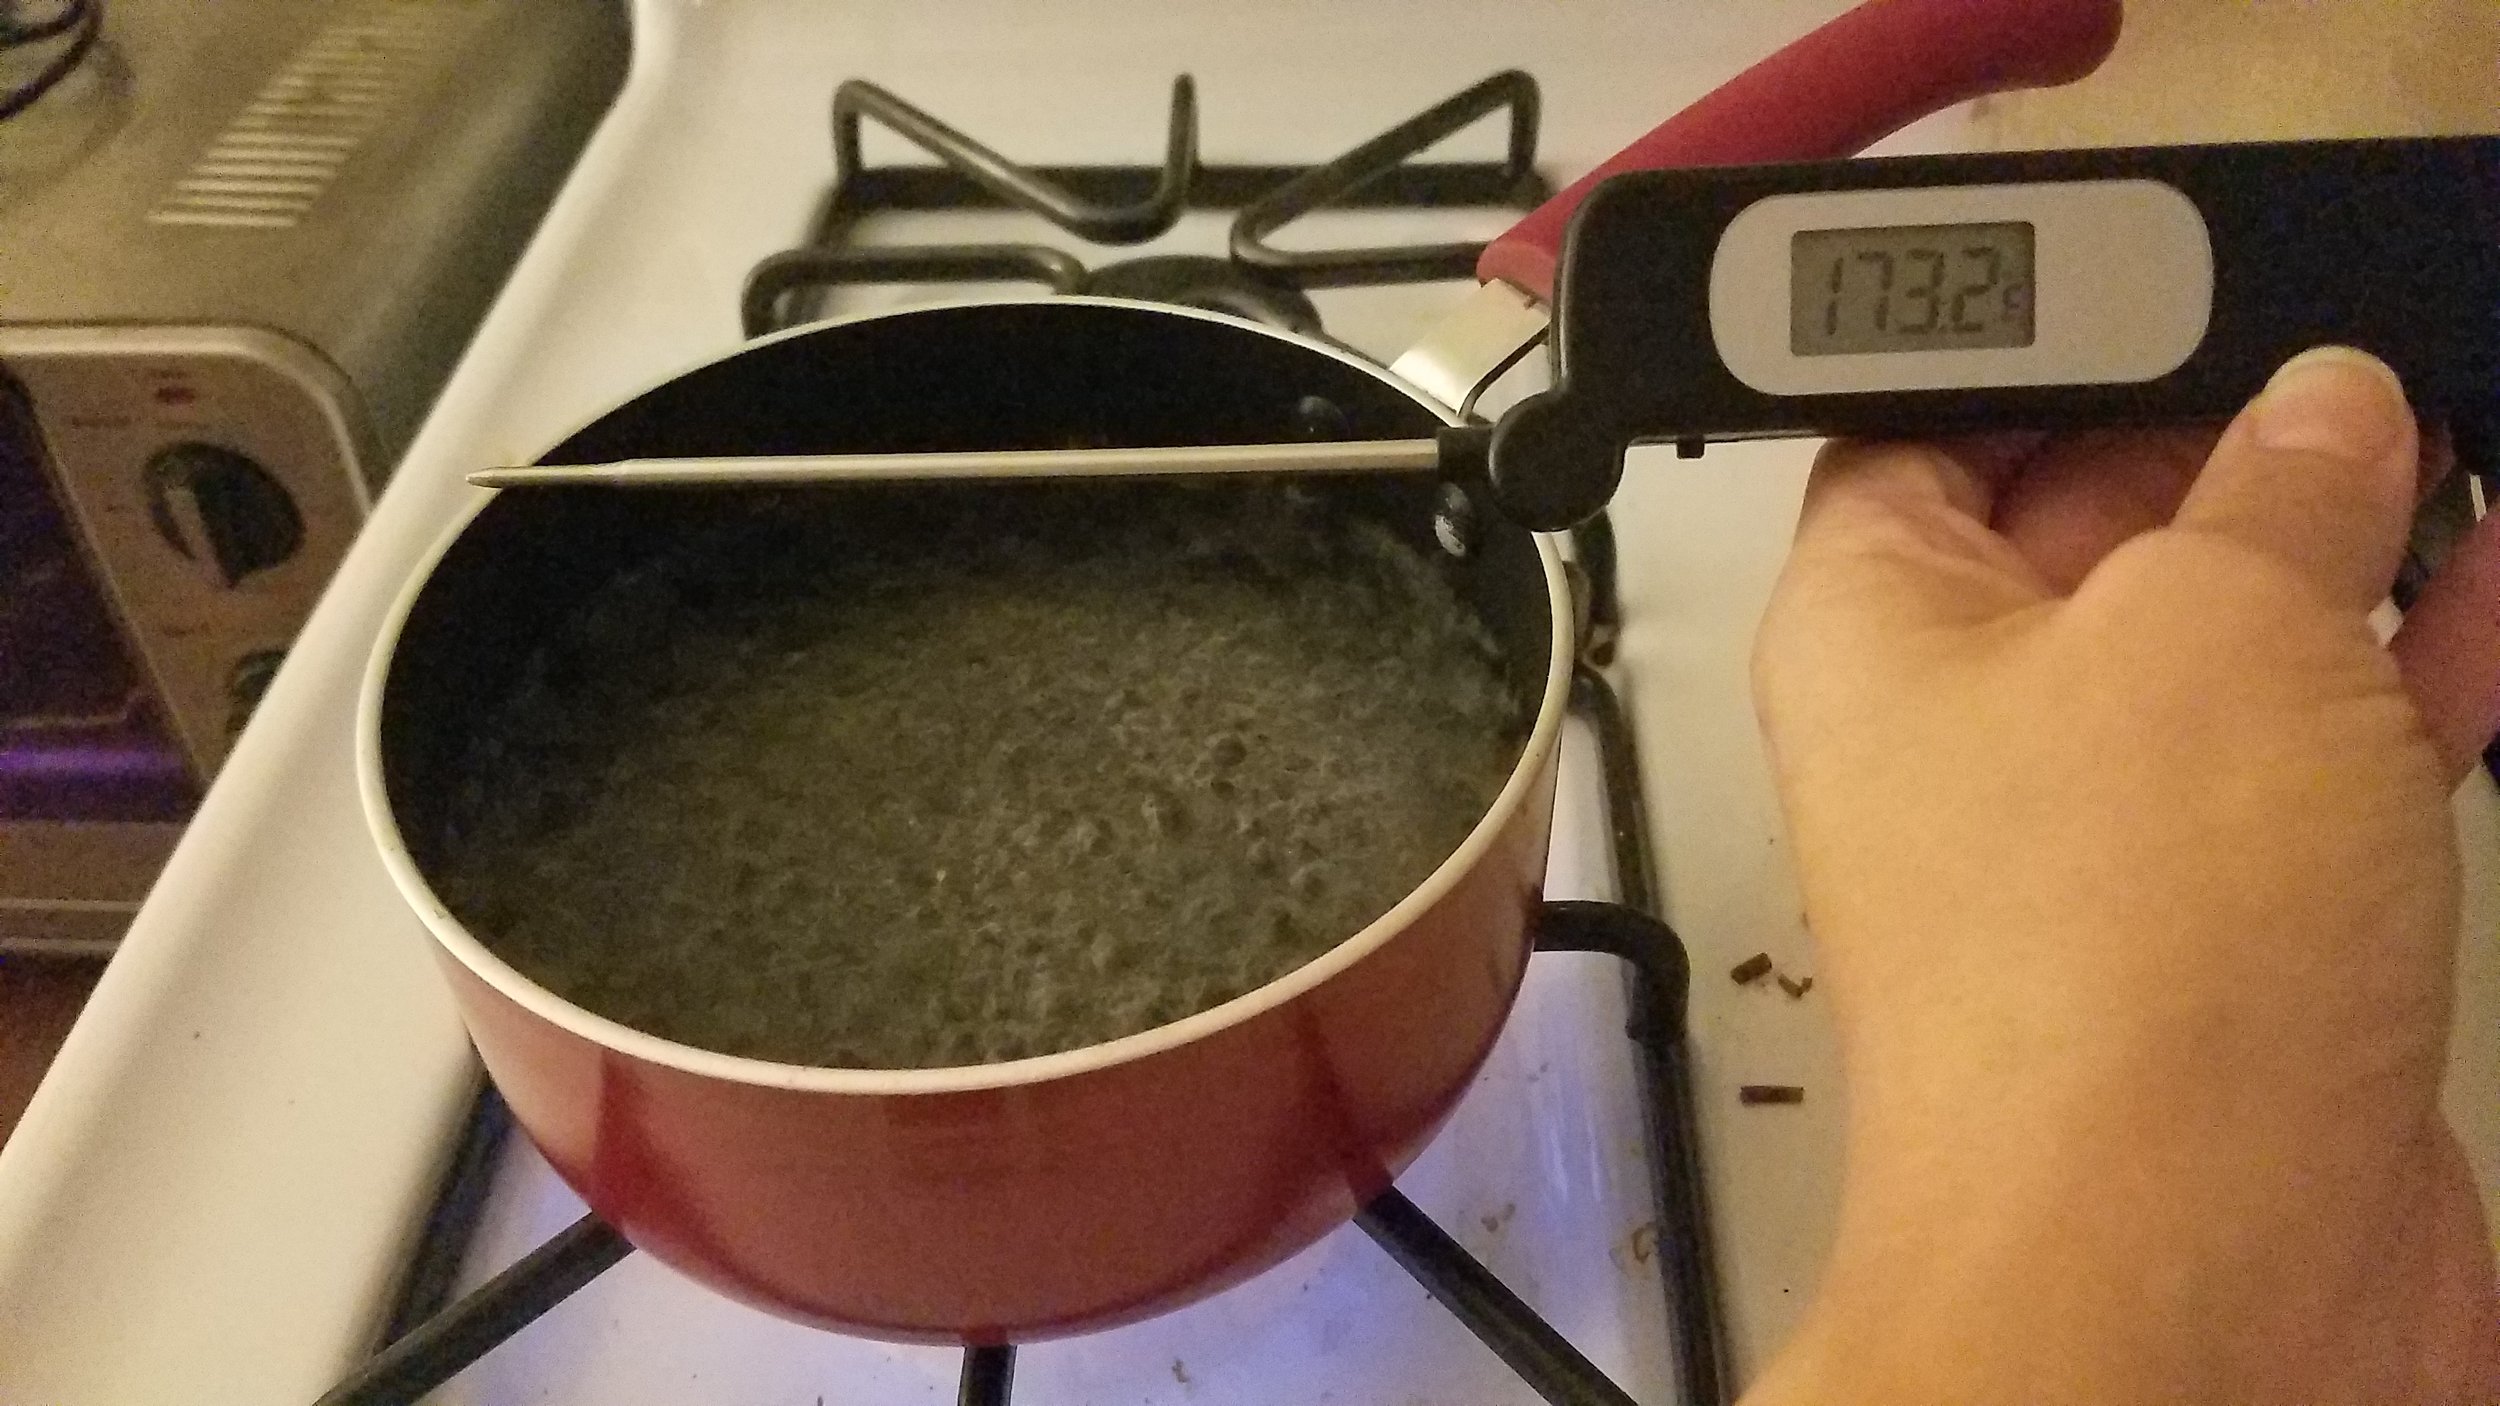 Testing how hot it is about an inch above boiling water